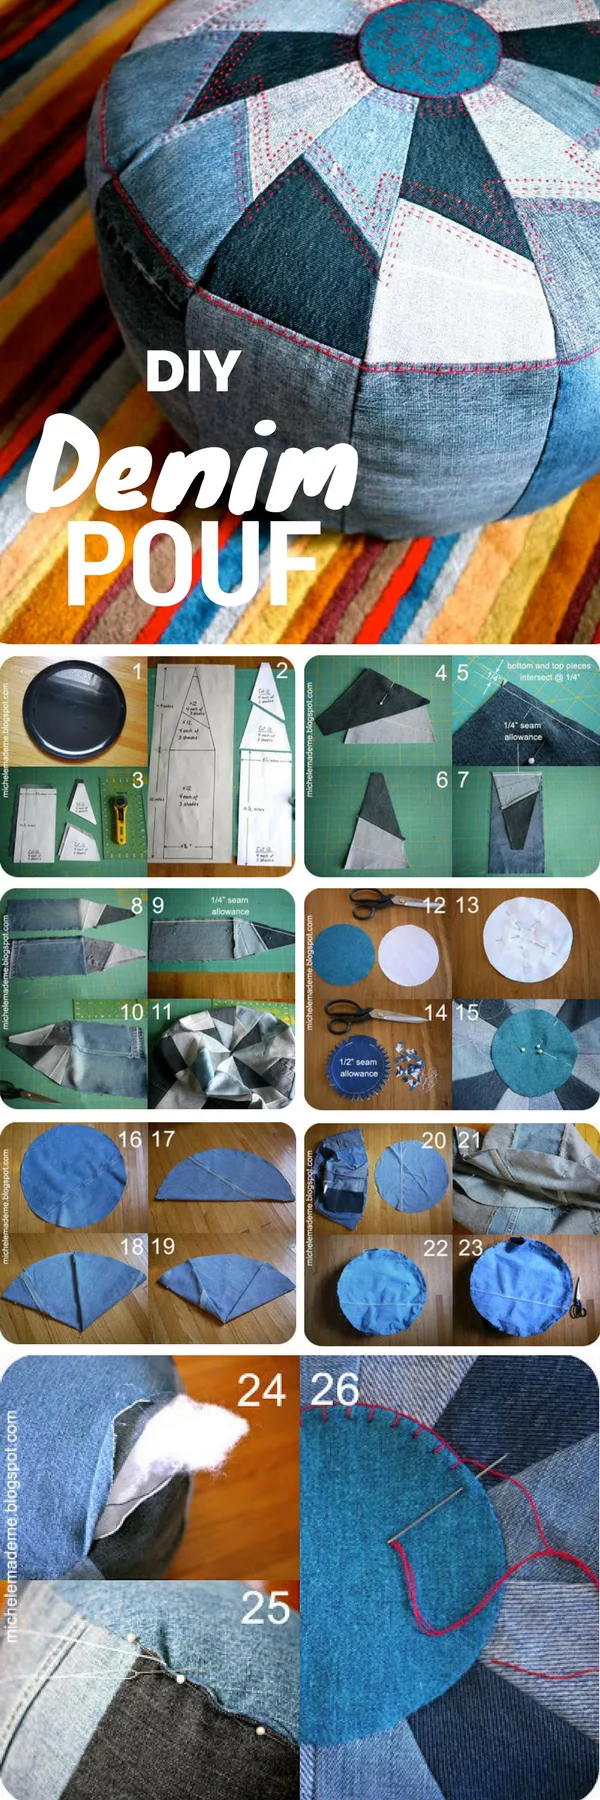 Check out the tutorial on how to make a DIY pouf from old jeans for home decor 